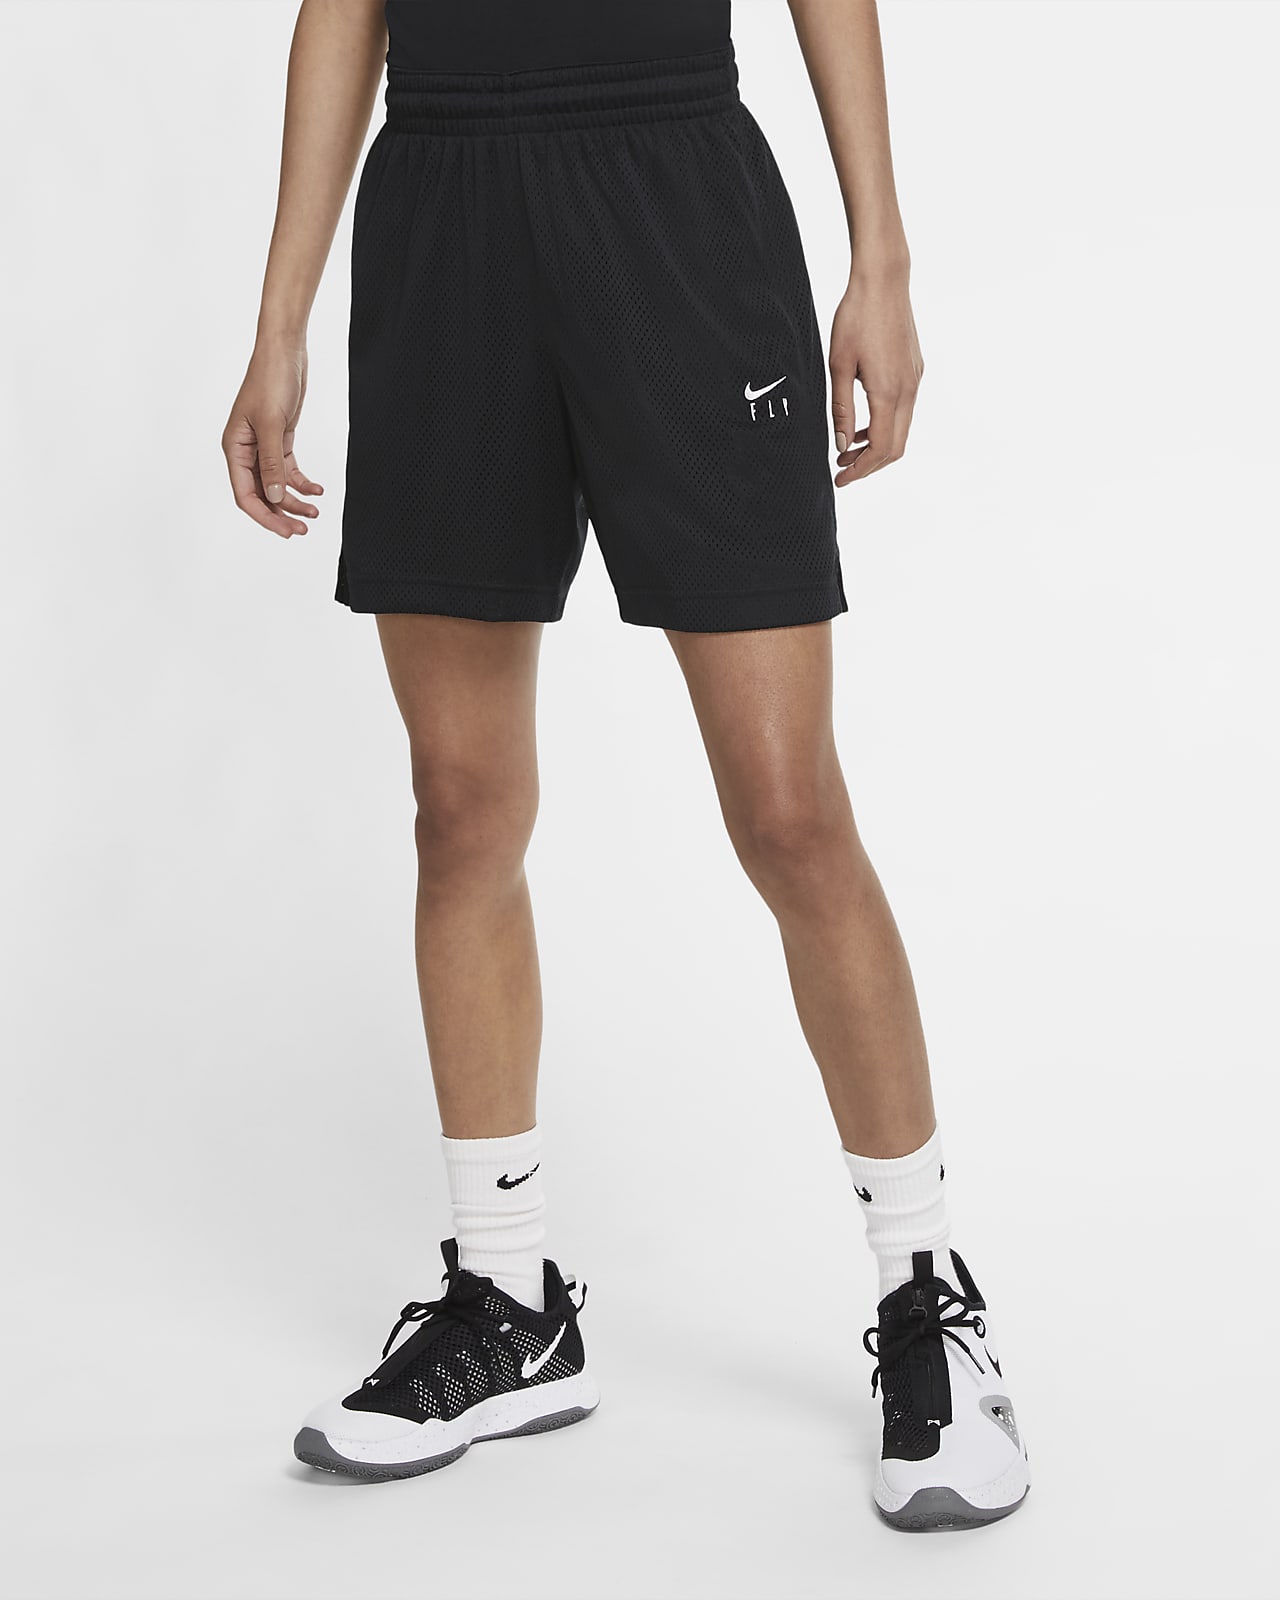 Assimileren verwijderen ornament Nike Fly Shorts Factory Sale, SAVE 39% - icarus.photos